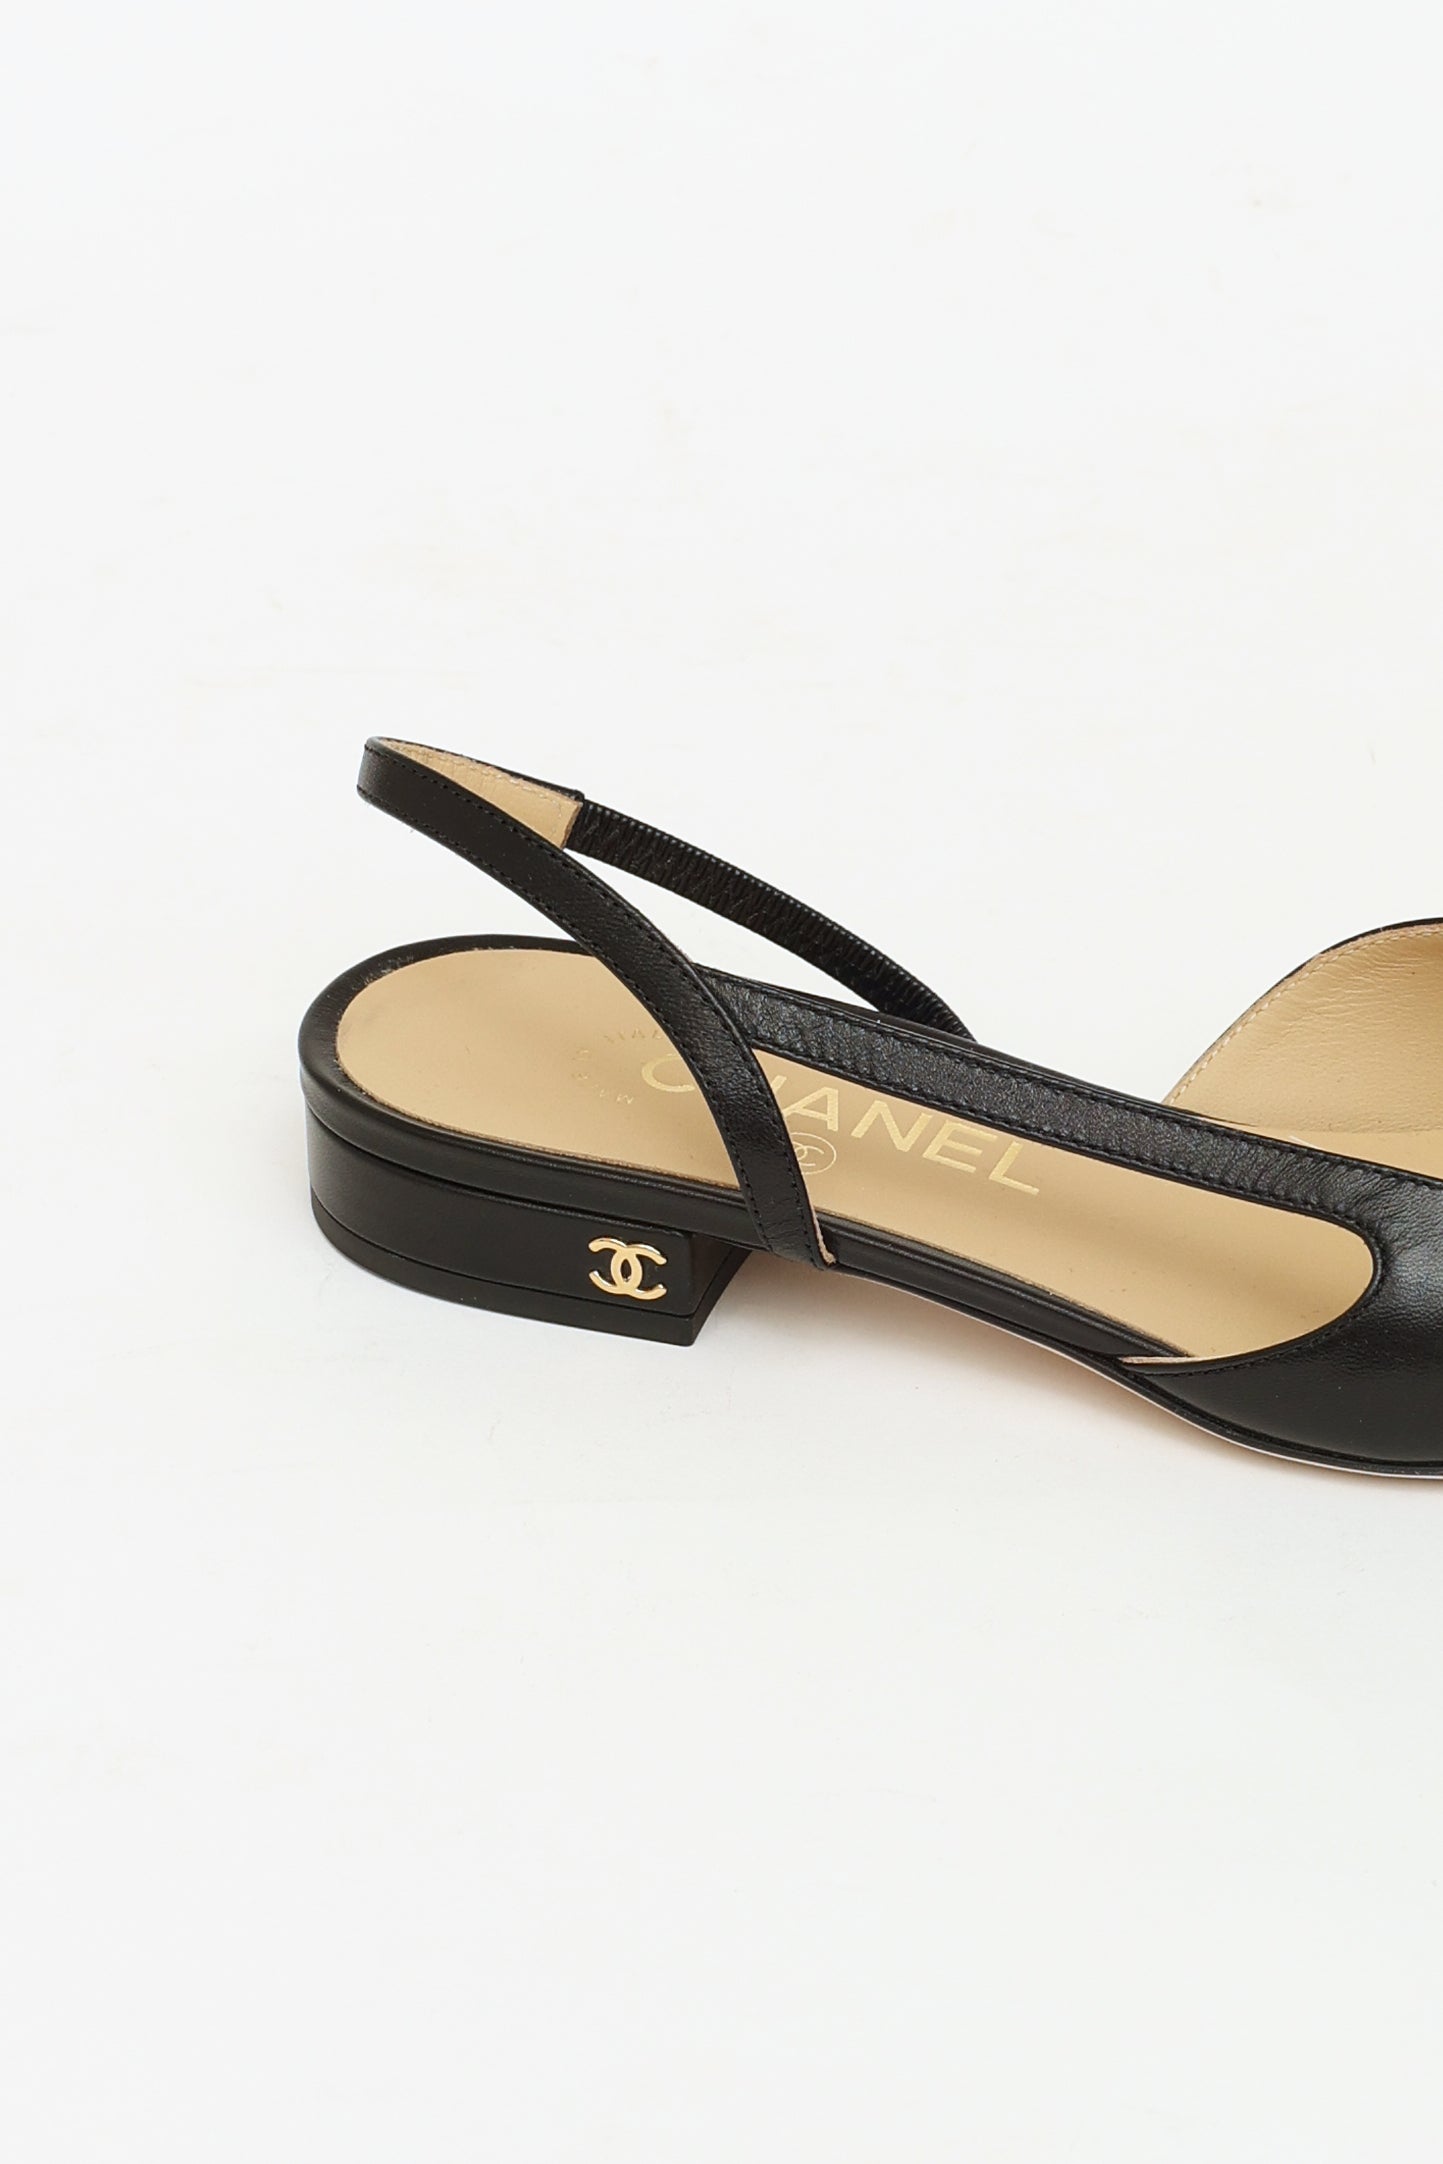 Chanel Beige/Black Leather and Fabric Cap-Toe CC Slingback D'orsay Pumps  Size 39.5 Chanel